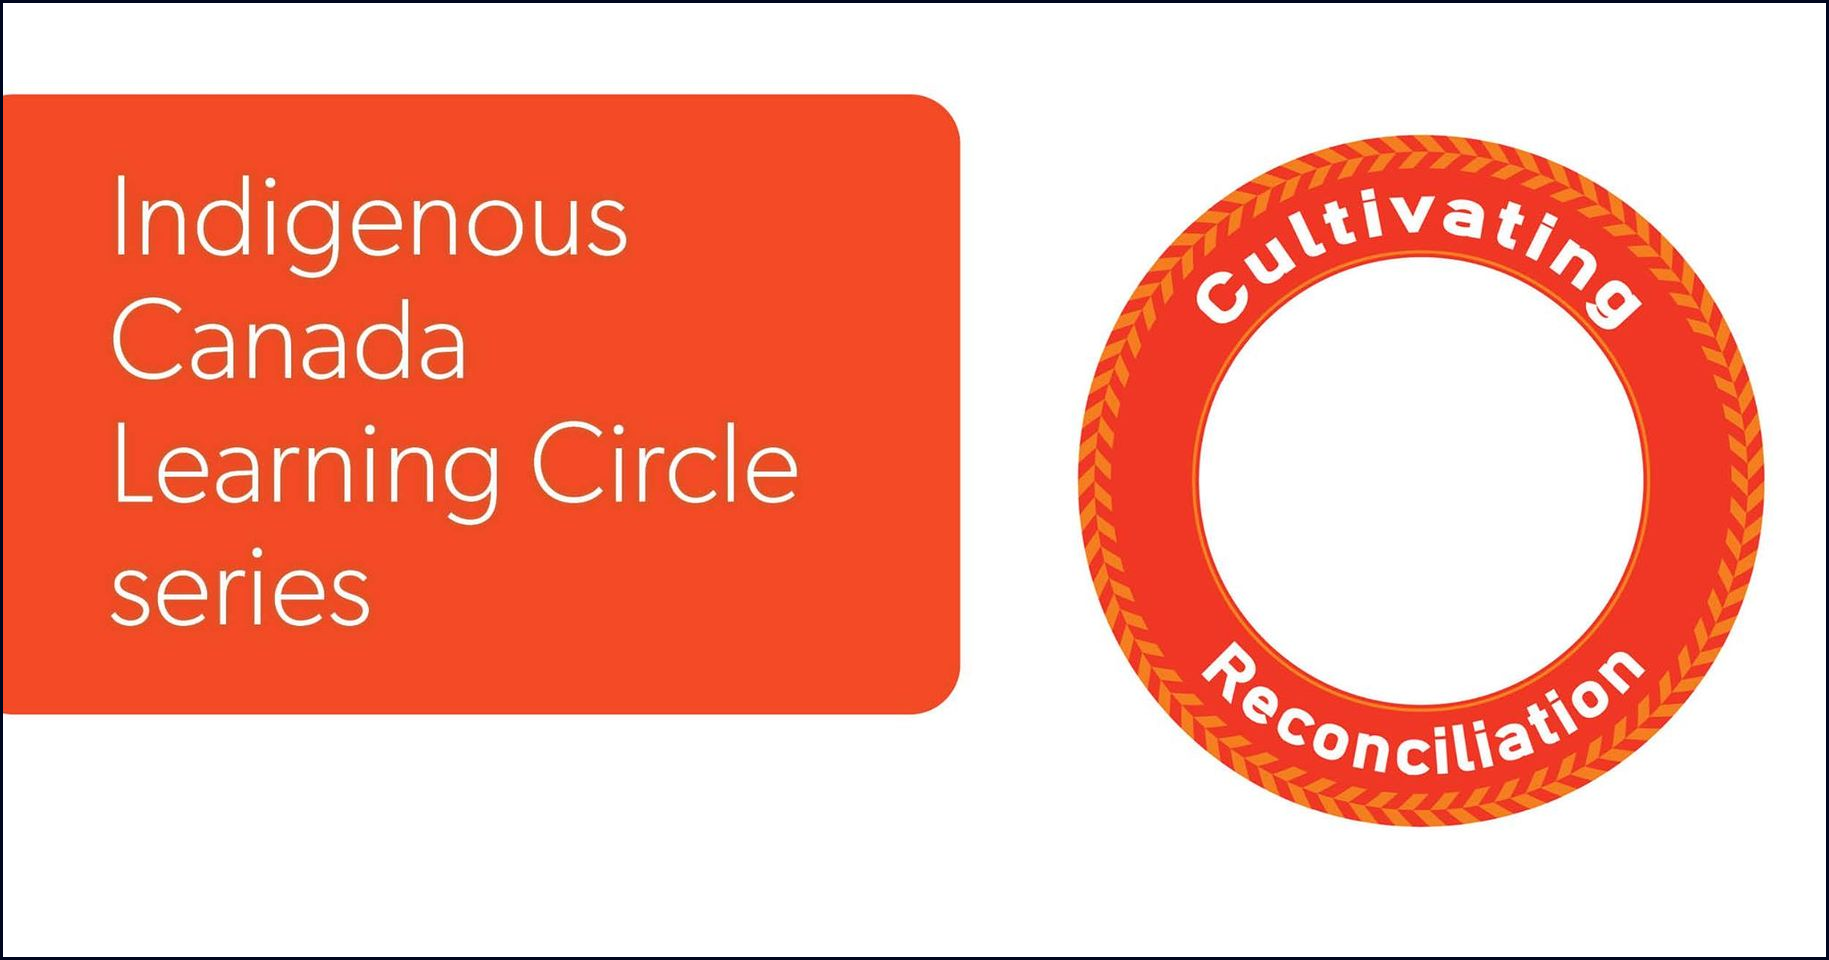 Indigenous Canada Learning Circle series